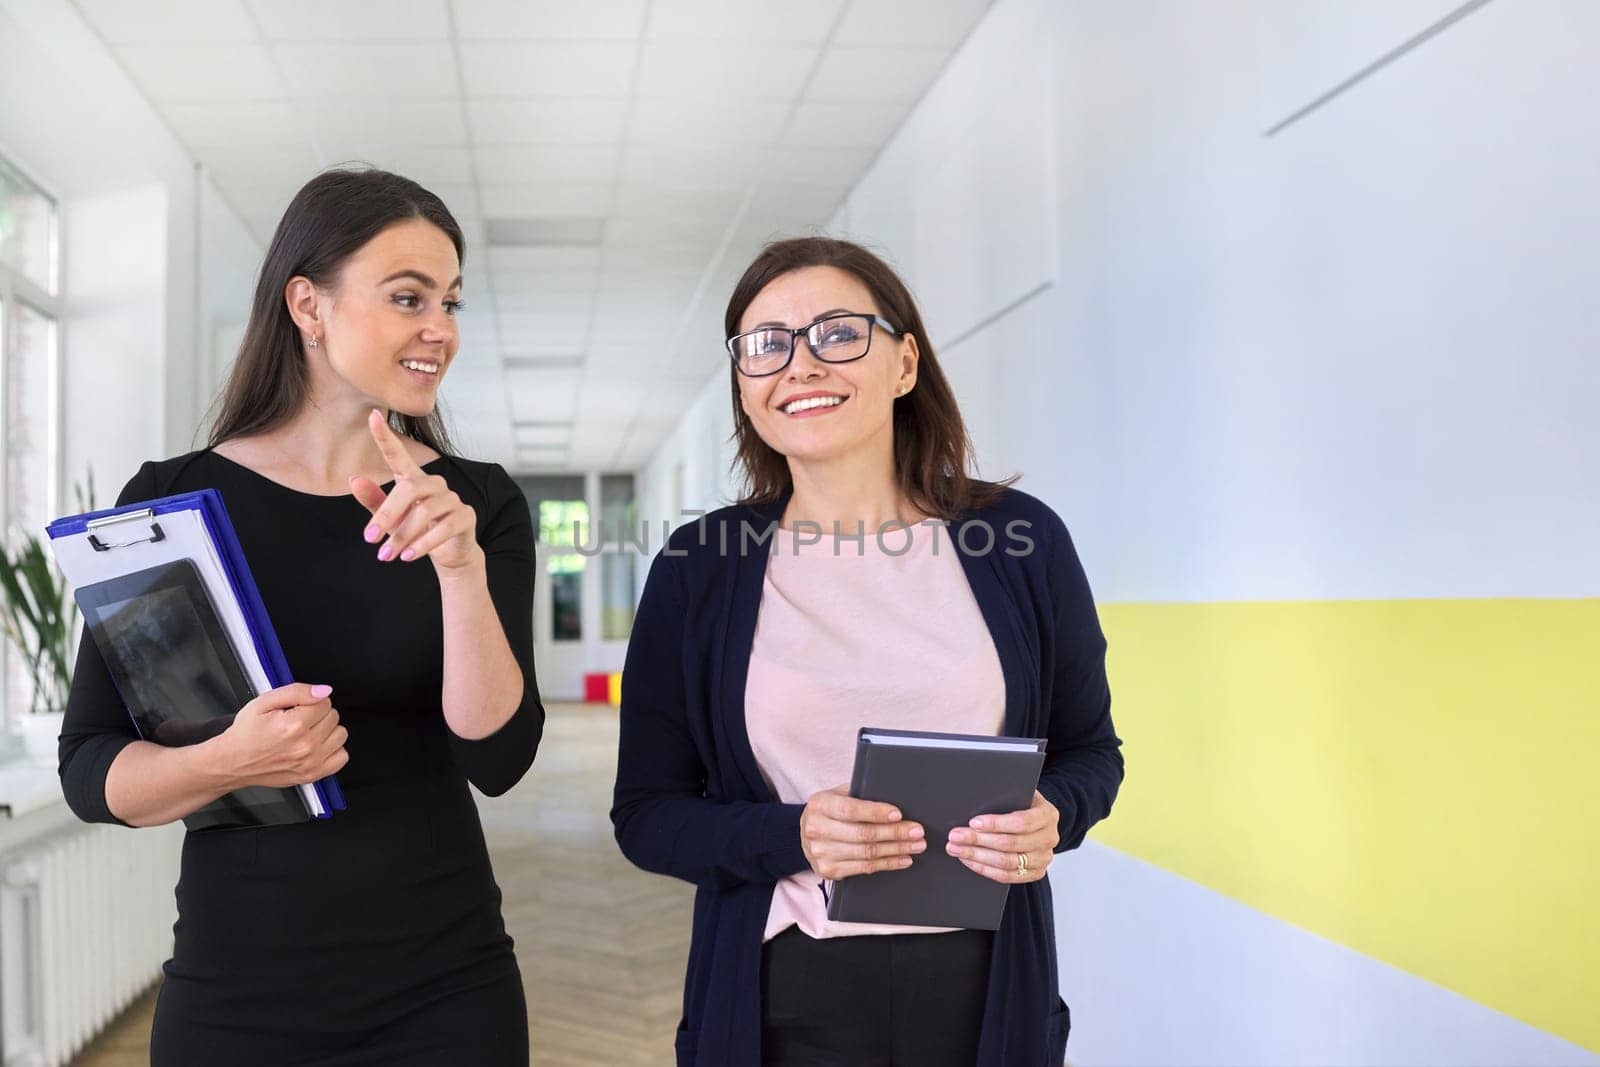 Two colleagues of businesswoman, teacher walking and talking on corridor of office, school. Positive smiling young and middle aged females, business education professions office workers concept